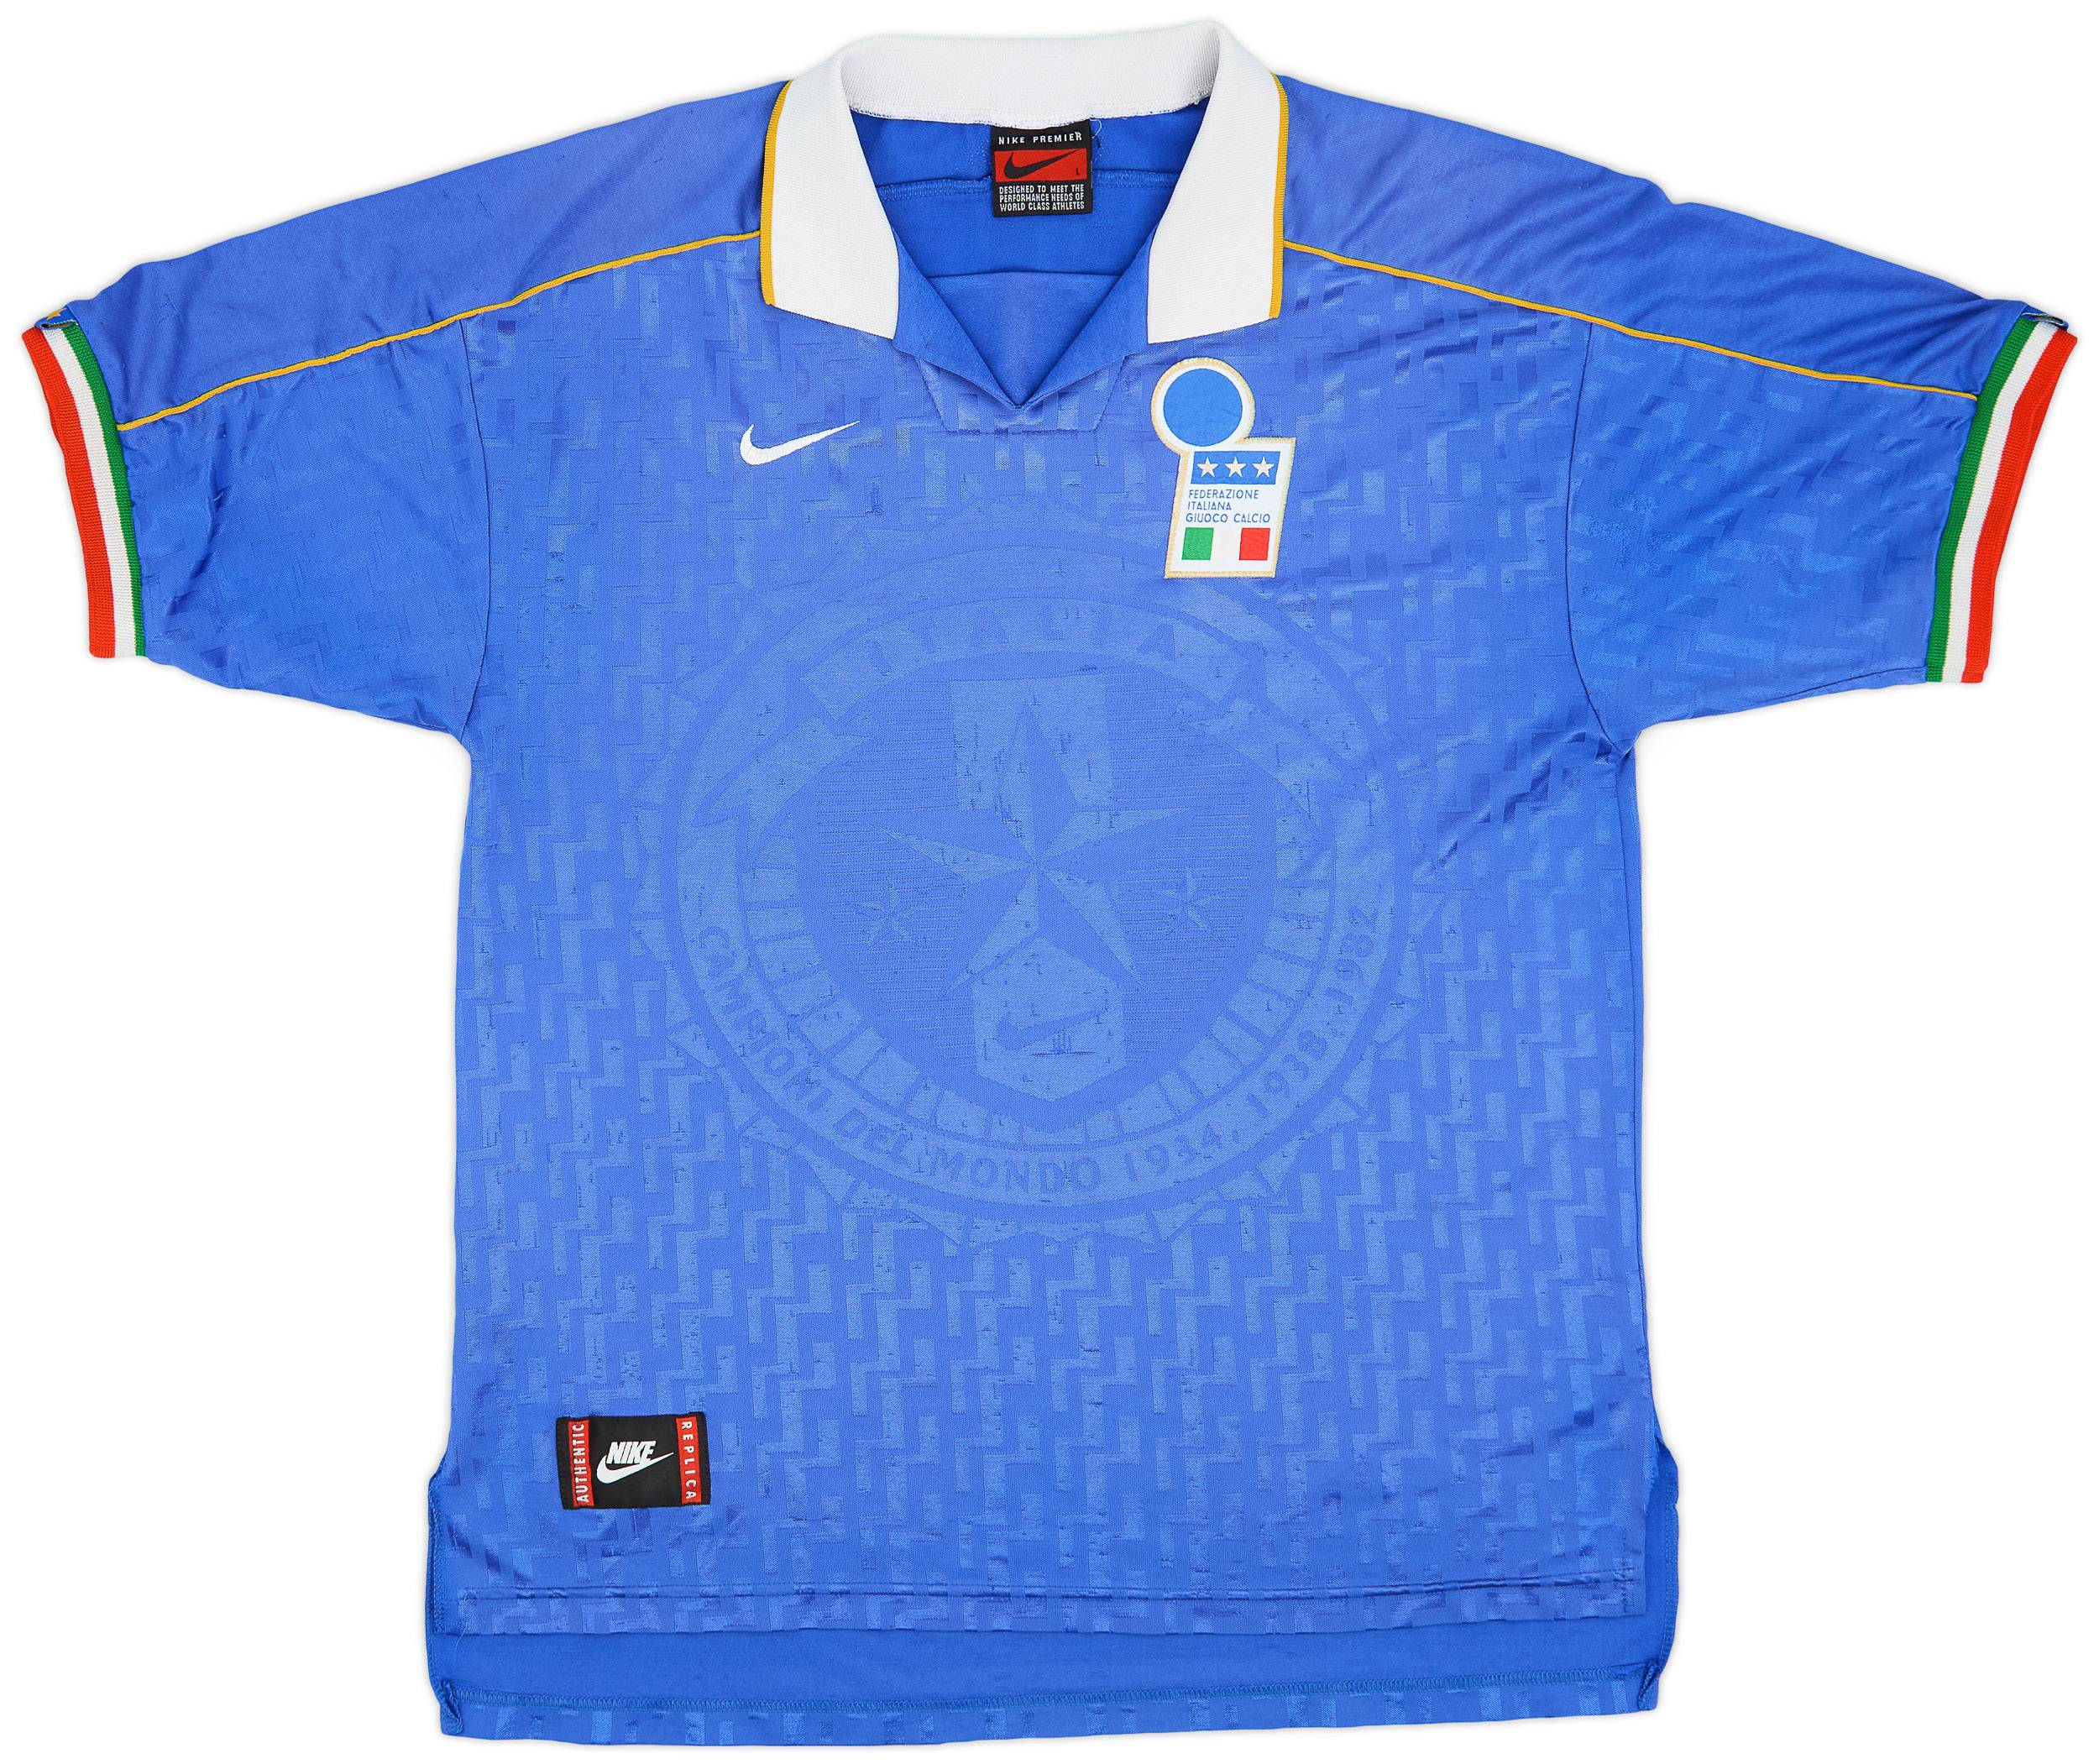 1994-96 Italy Home Shirt - 5/10 - (L)